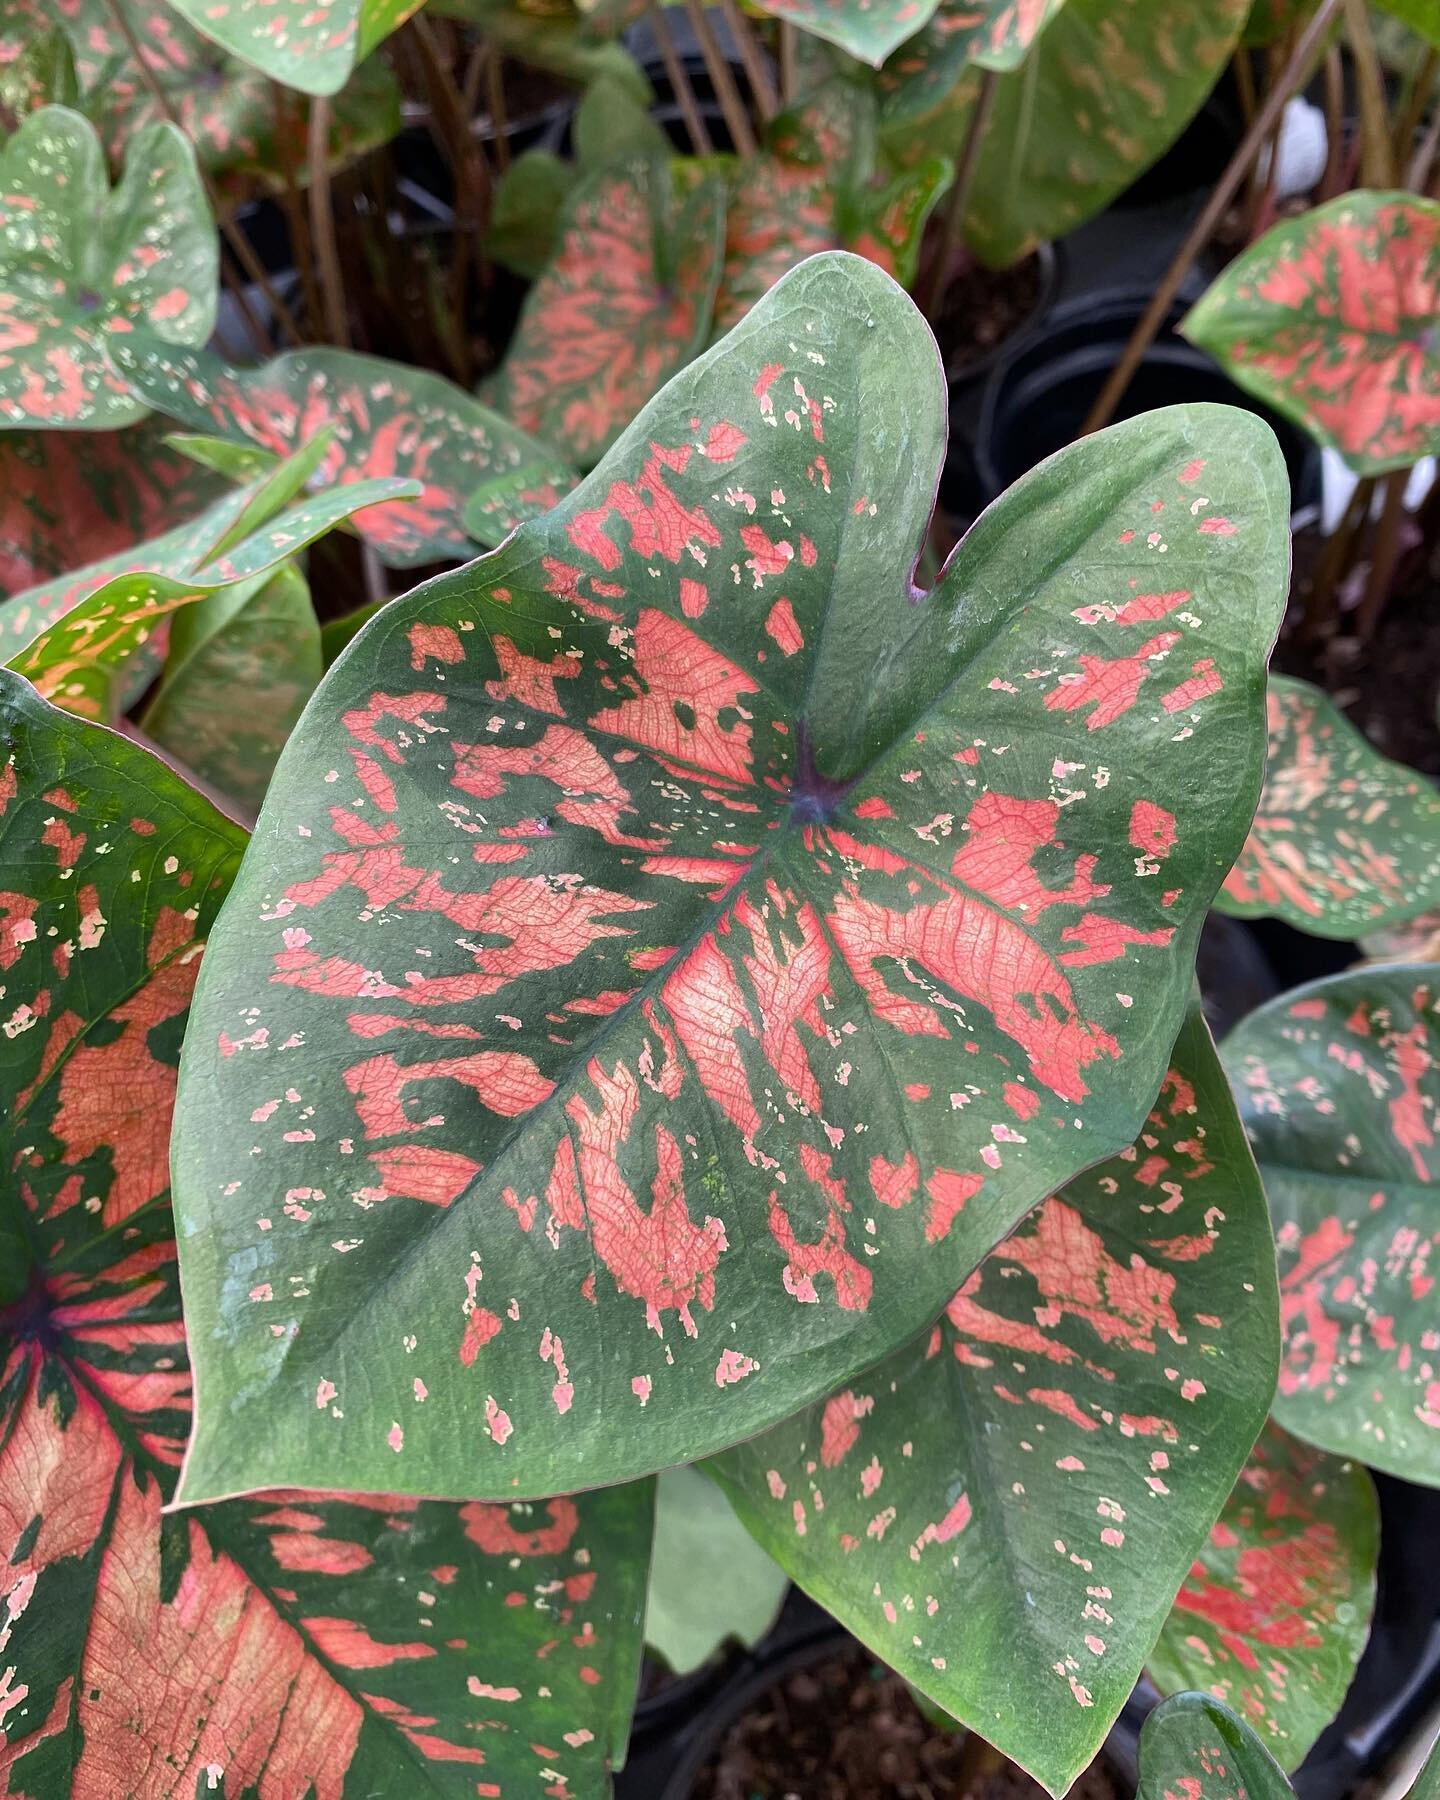 Caladiums are looking so good right now! We are overflowing with all sorts of plants right now with more arriving every day!